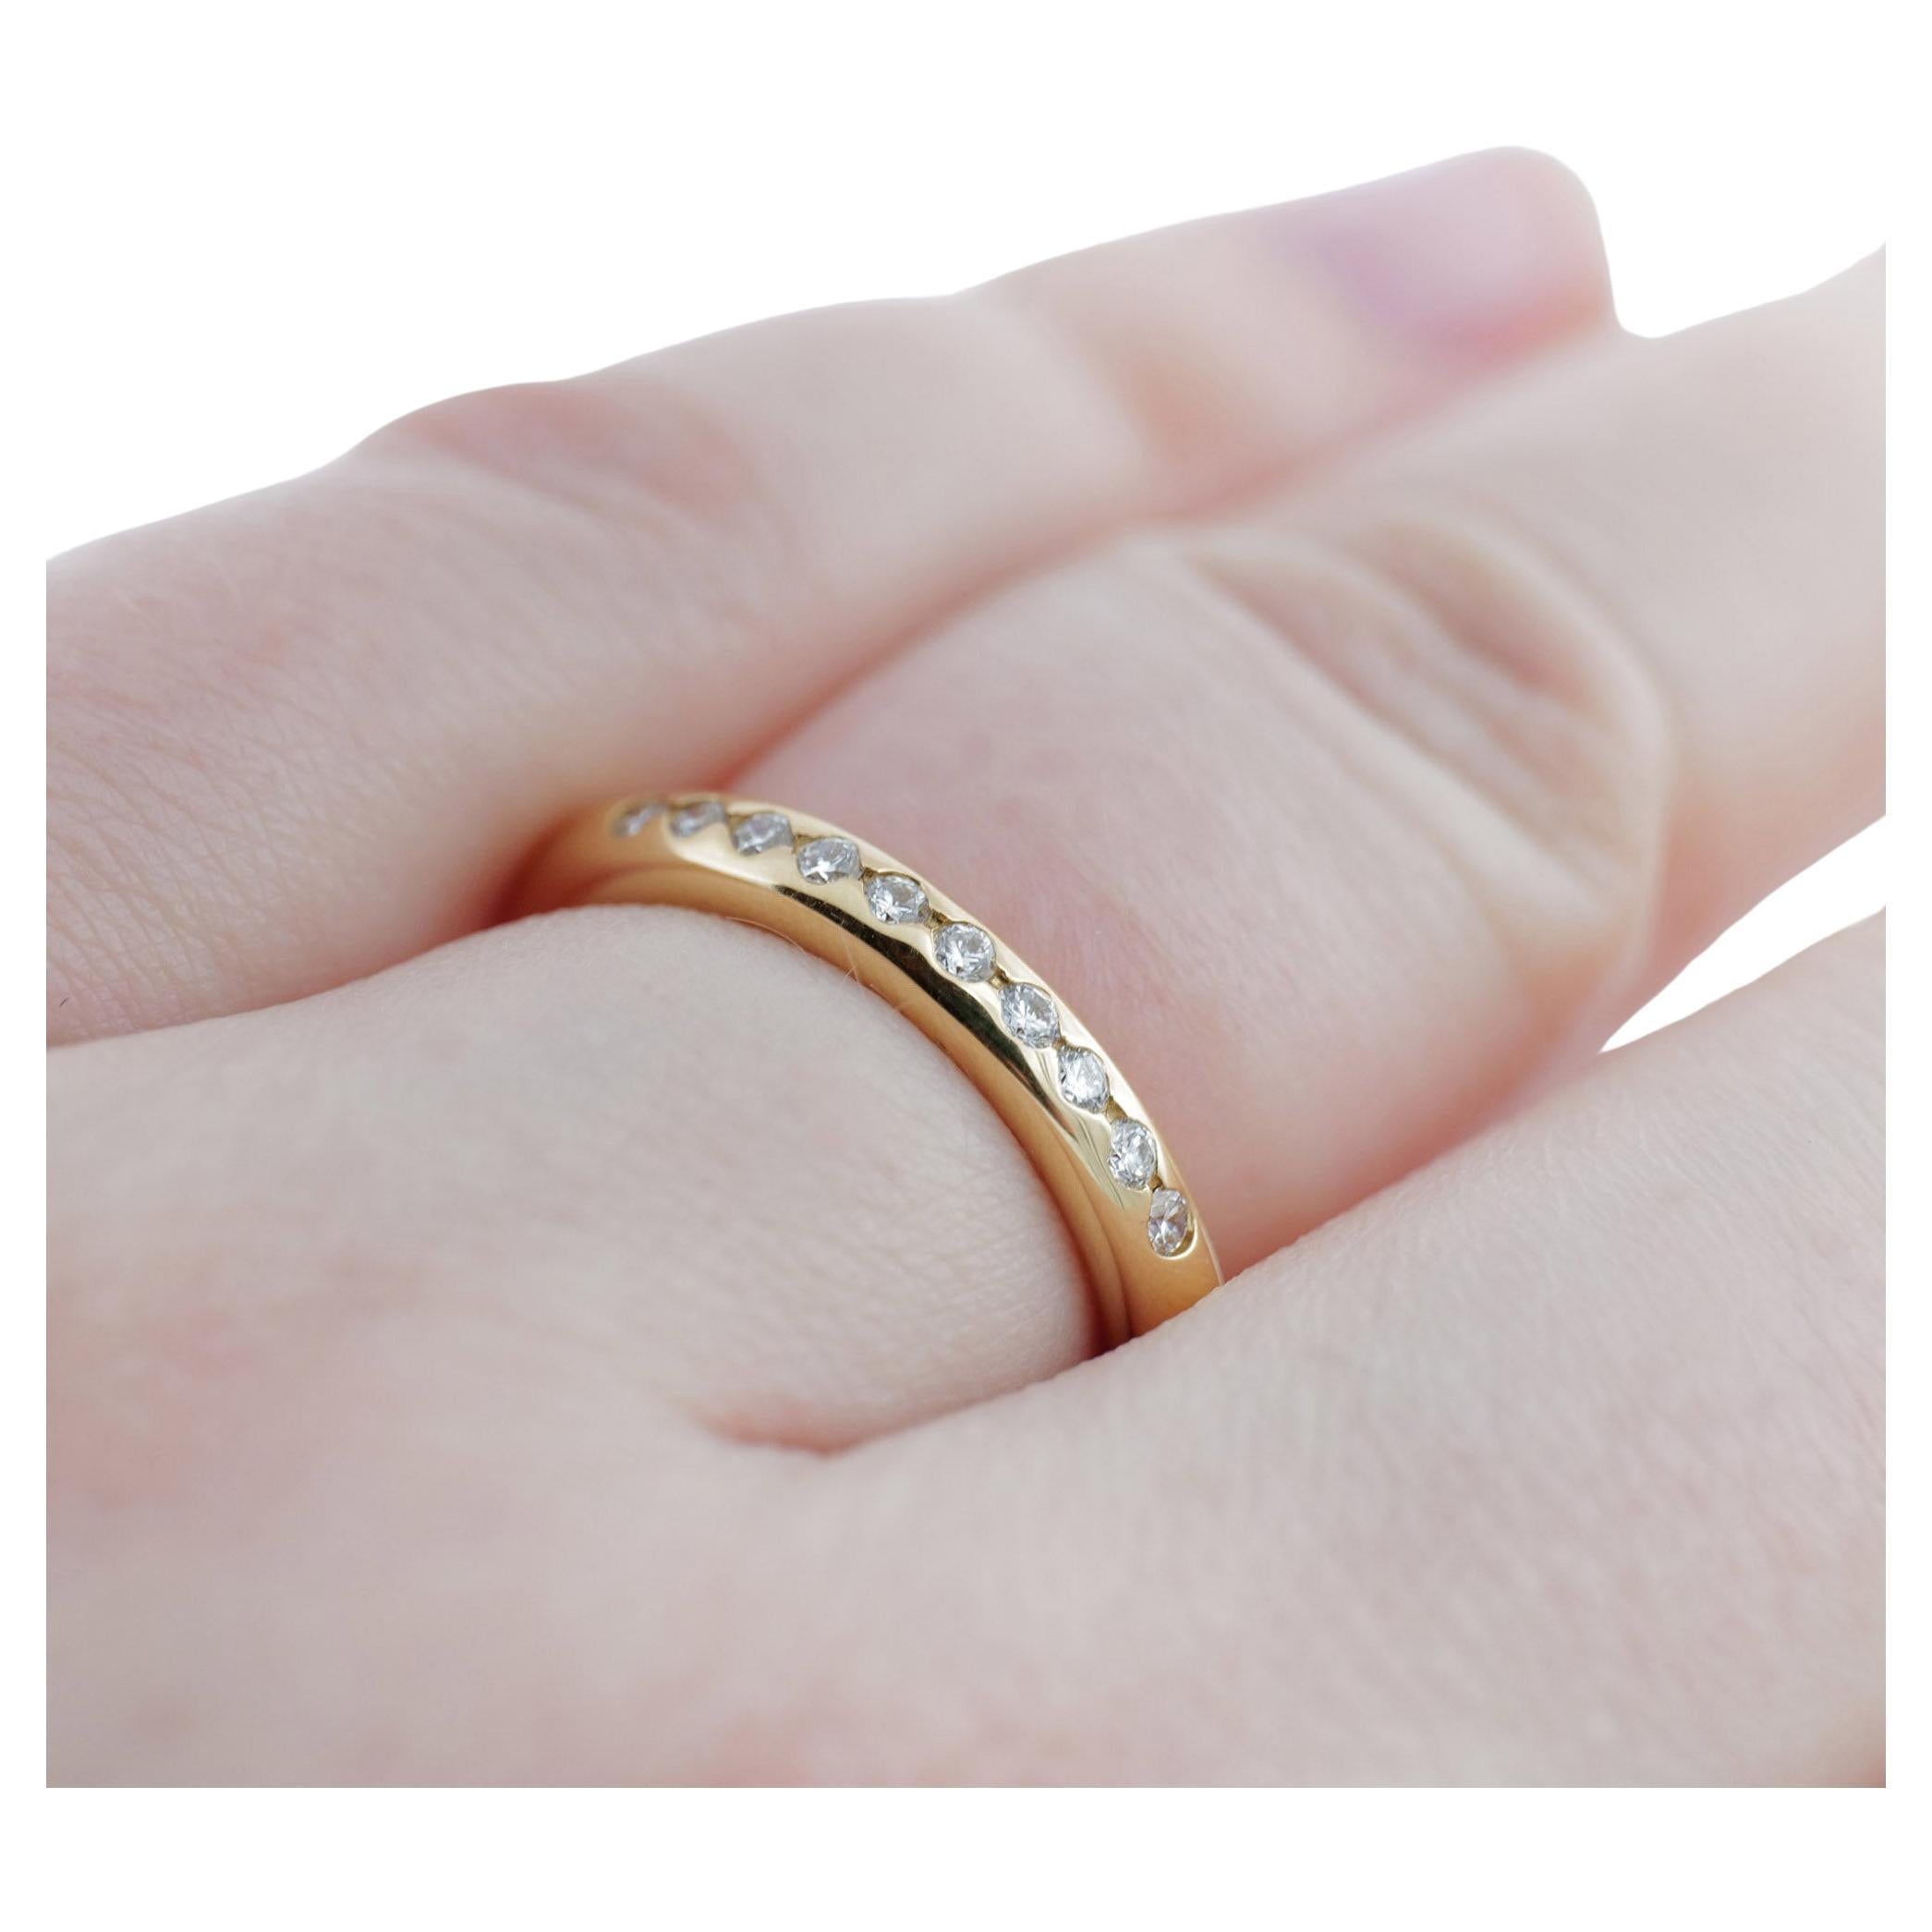 Band ring in yellow gold with 10 brilliant-cut diamonds